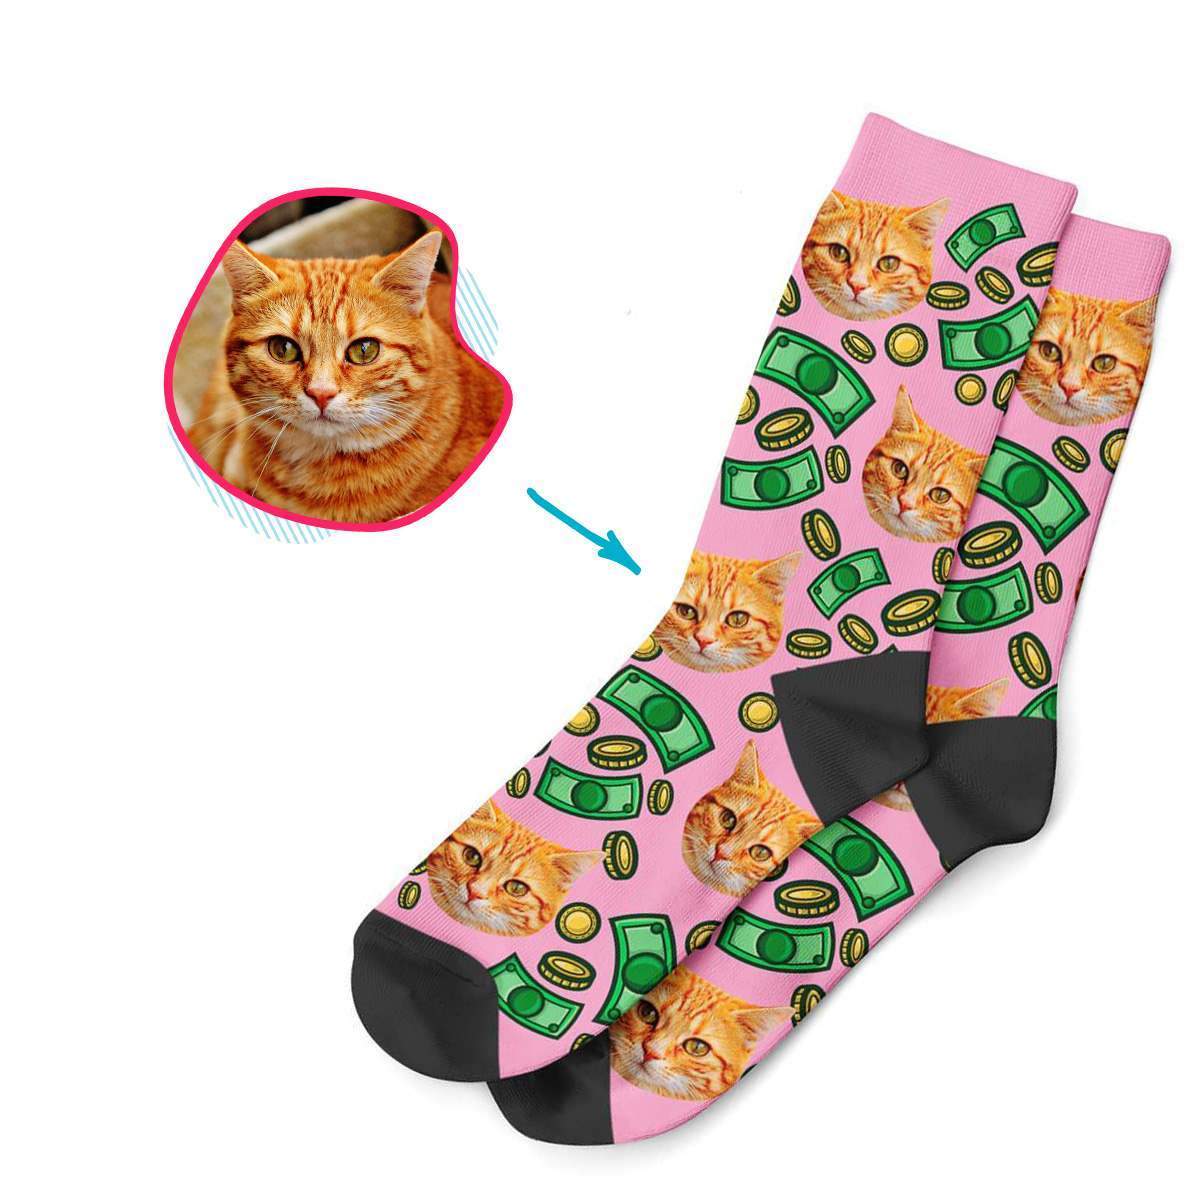 pink Money socks personalized with photo of face printed on them